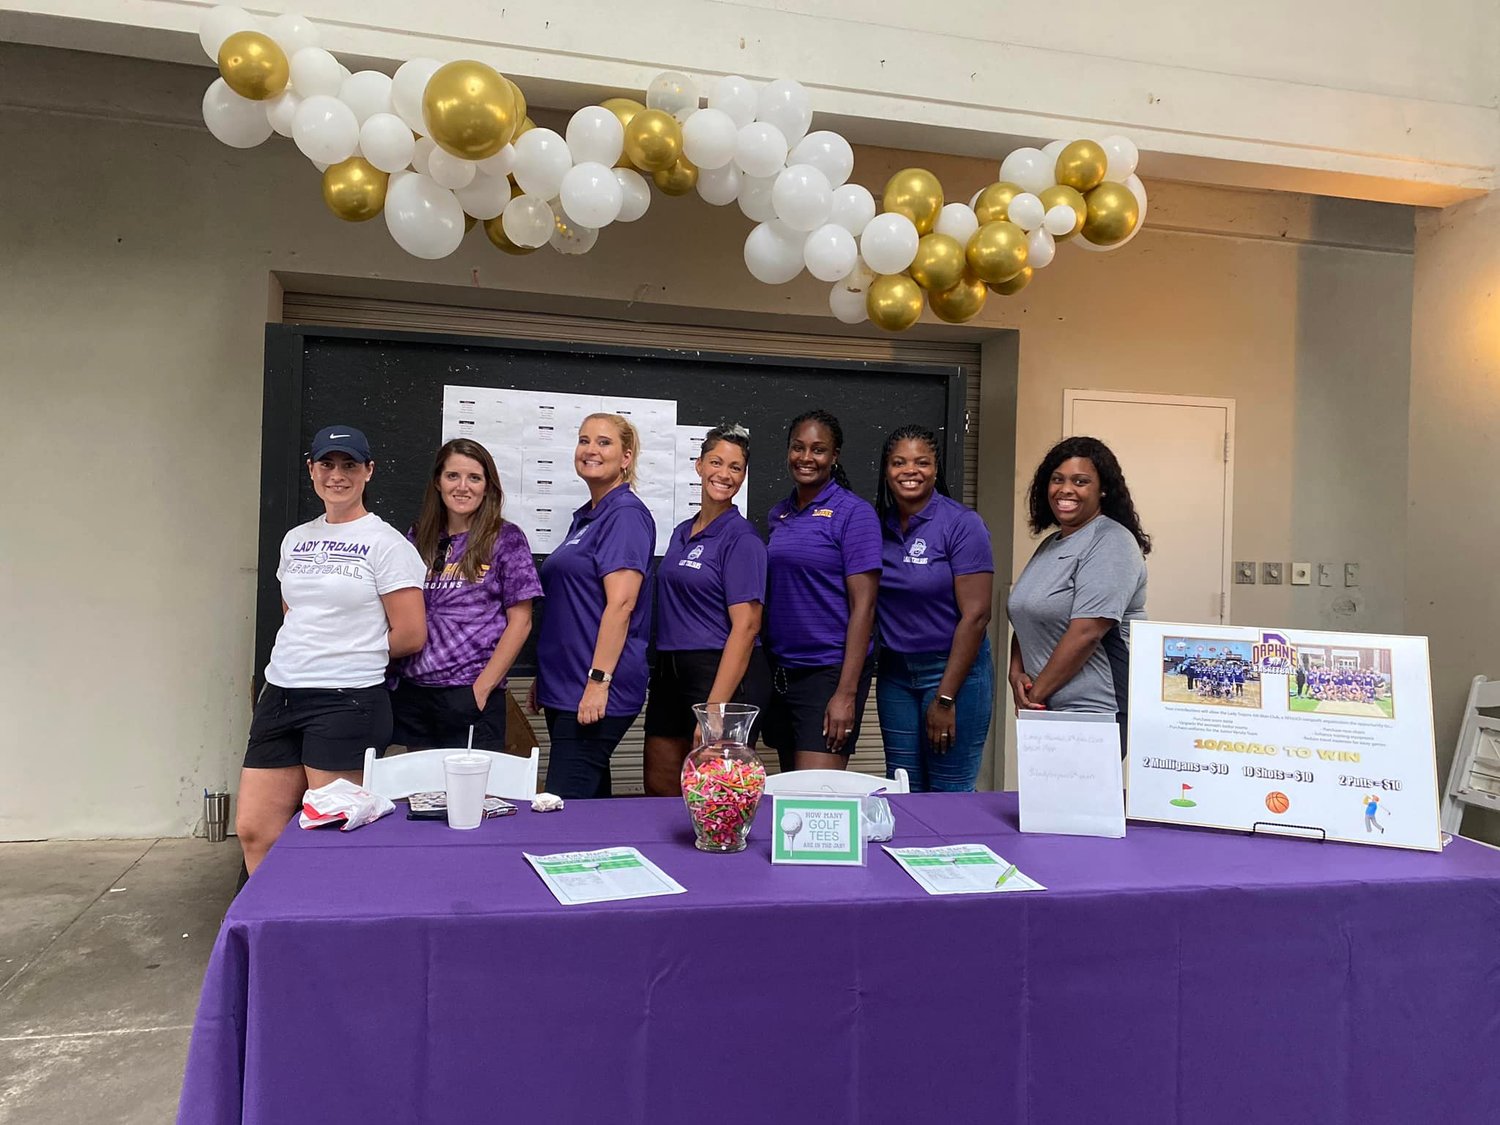 Rock Creek Golf Club was the site for the inaugural golf tournament hosted by the Daphne Lady Trojans 6th Man Club last Friday.